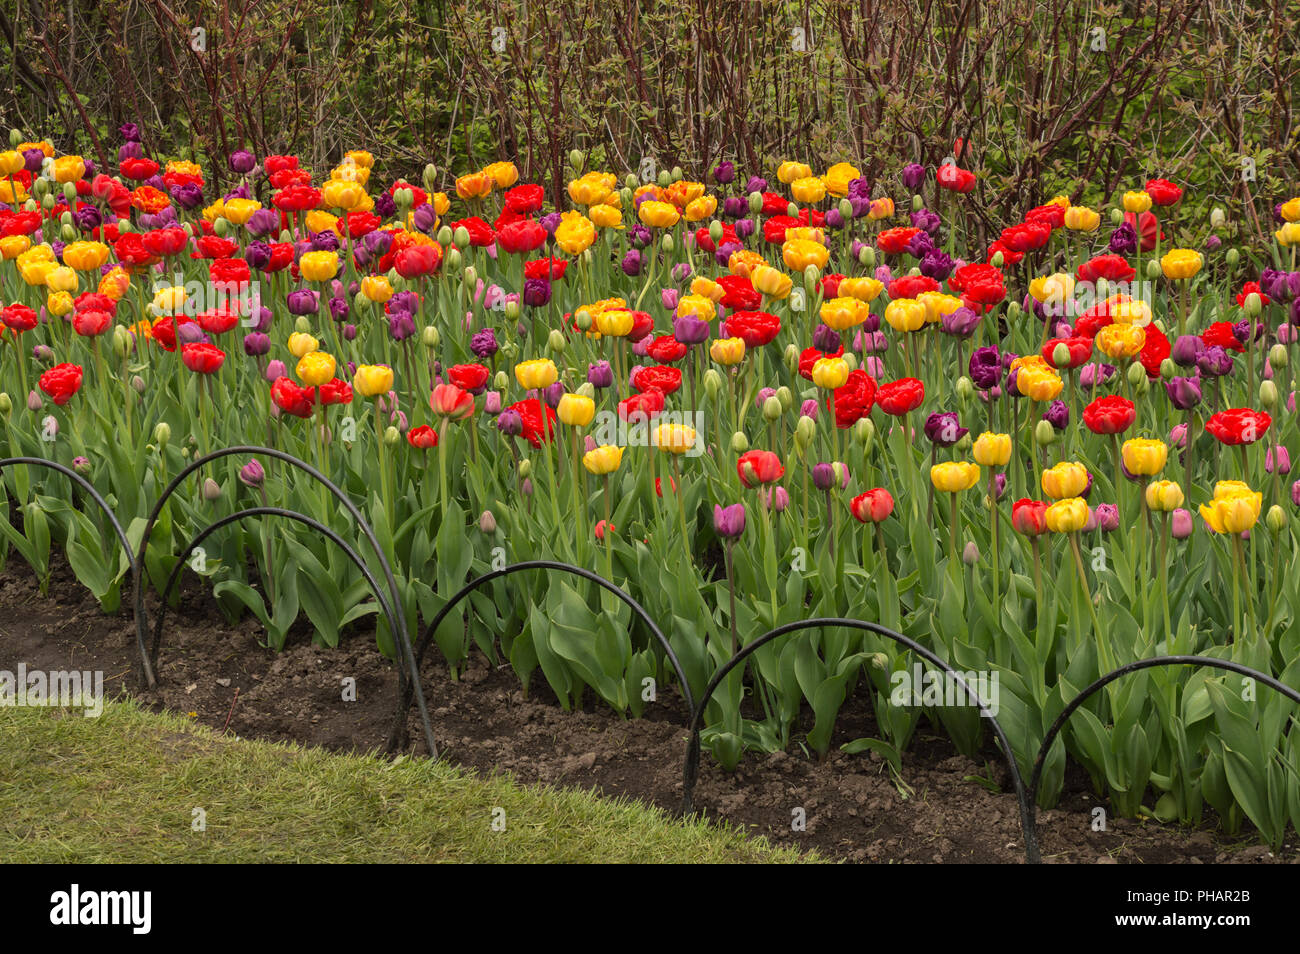 Many lush colorful tulips in spring after a light rain with raindrops on the petals Stock Photo